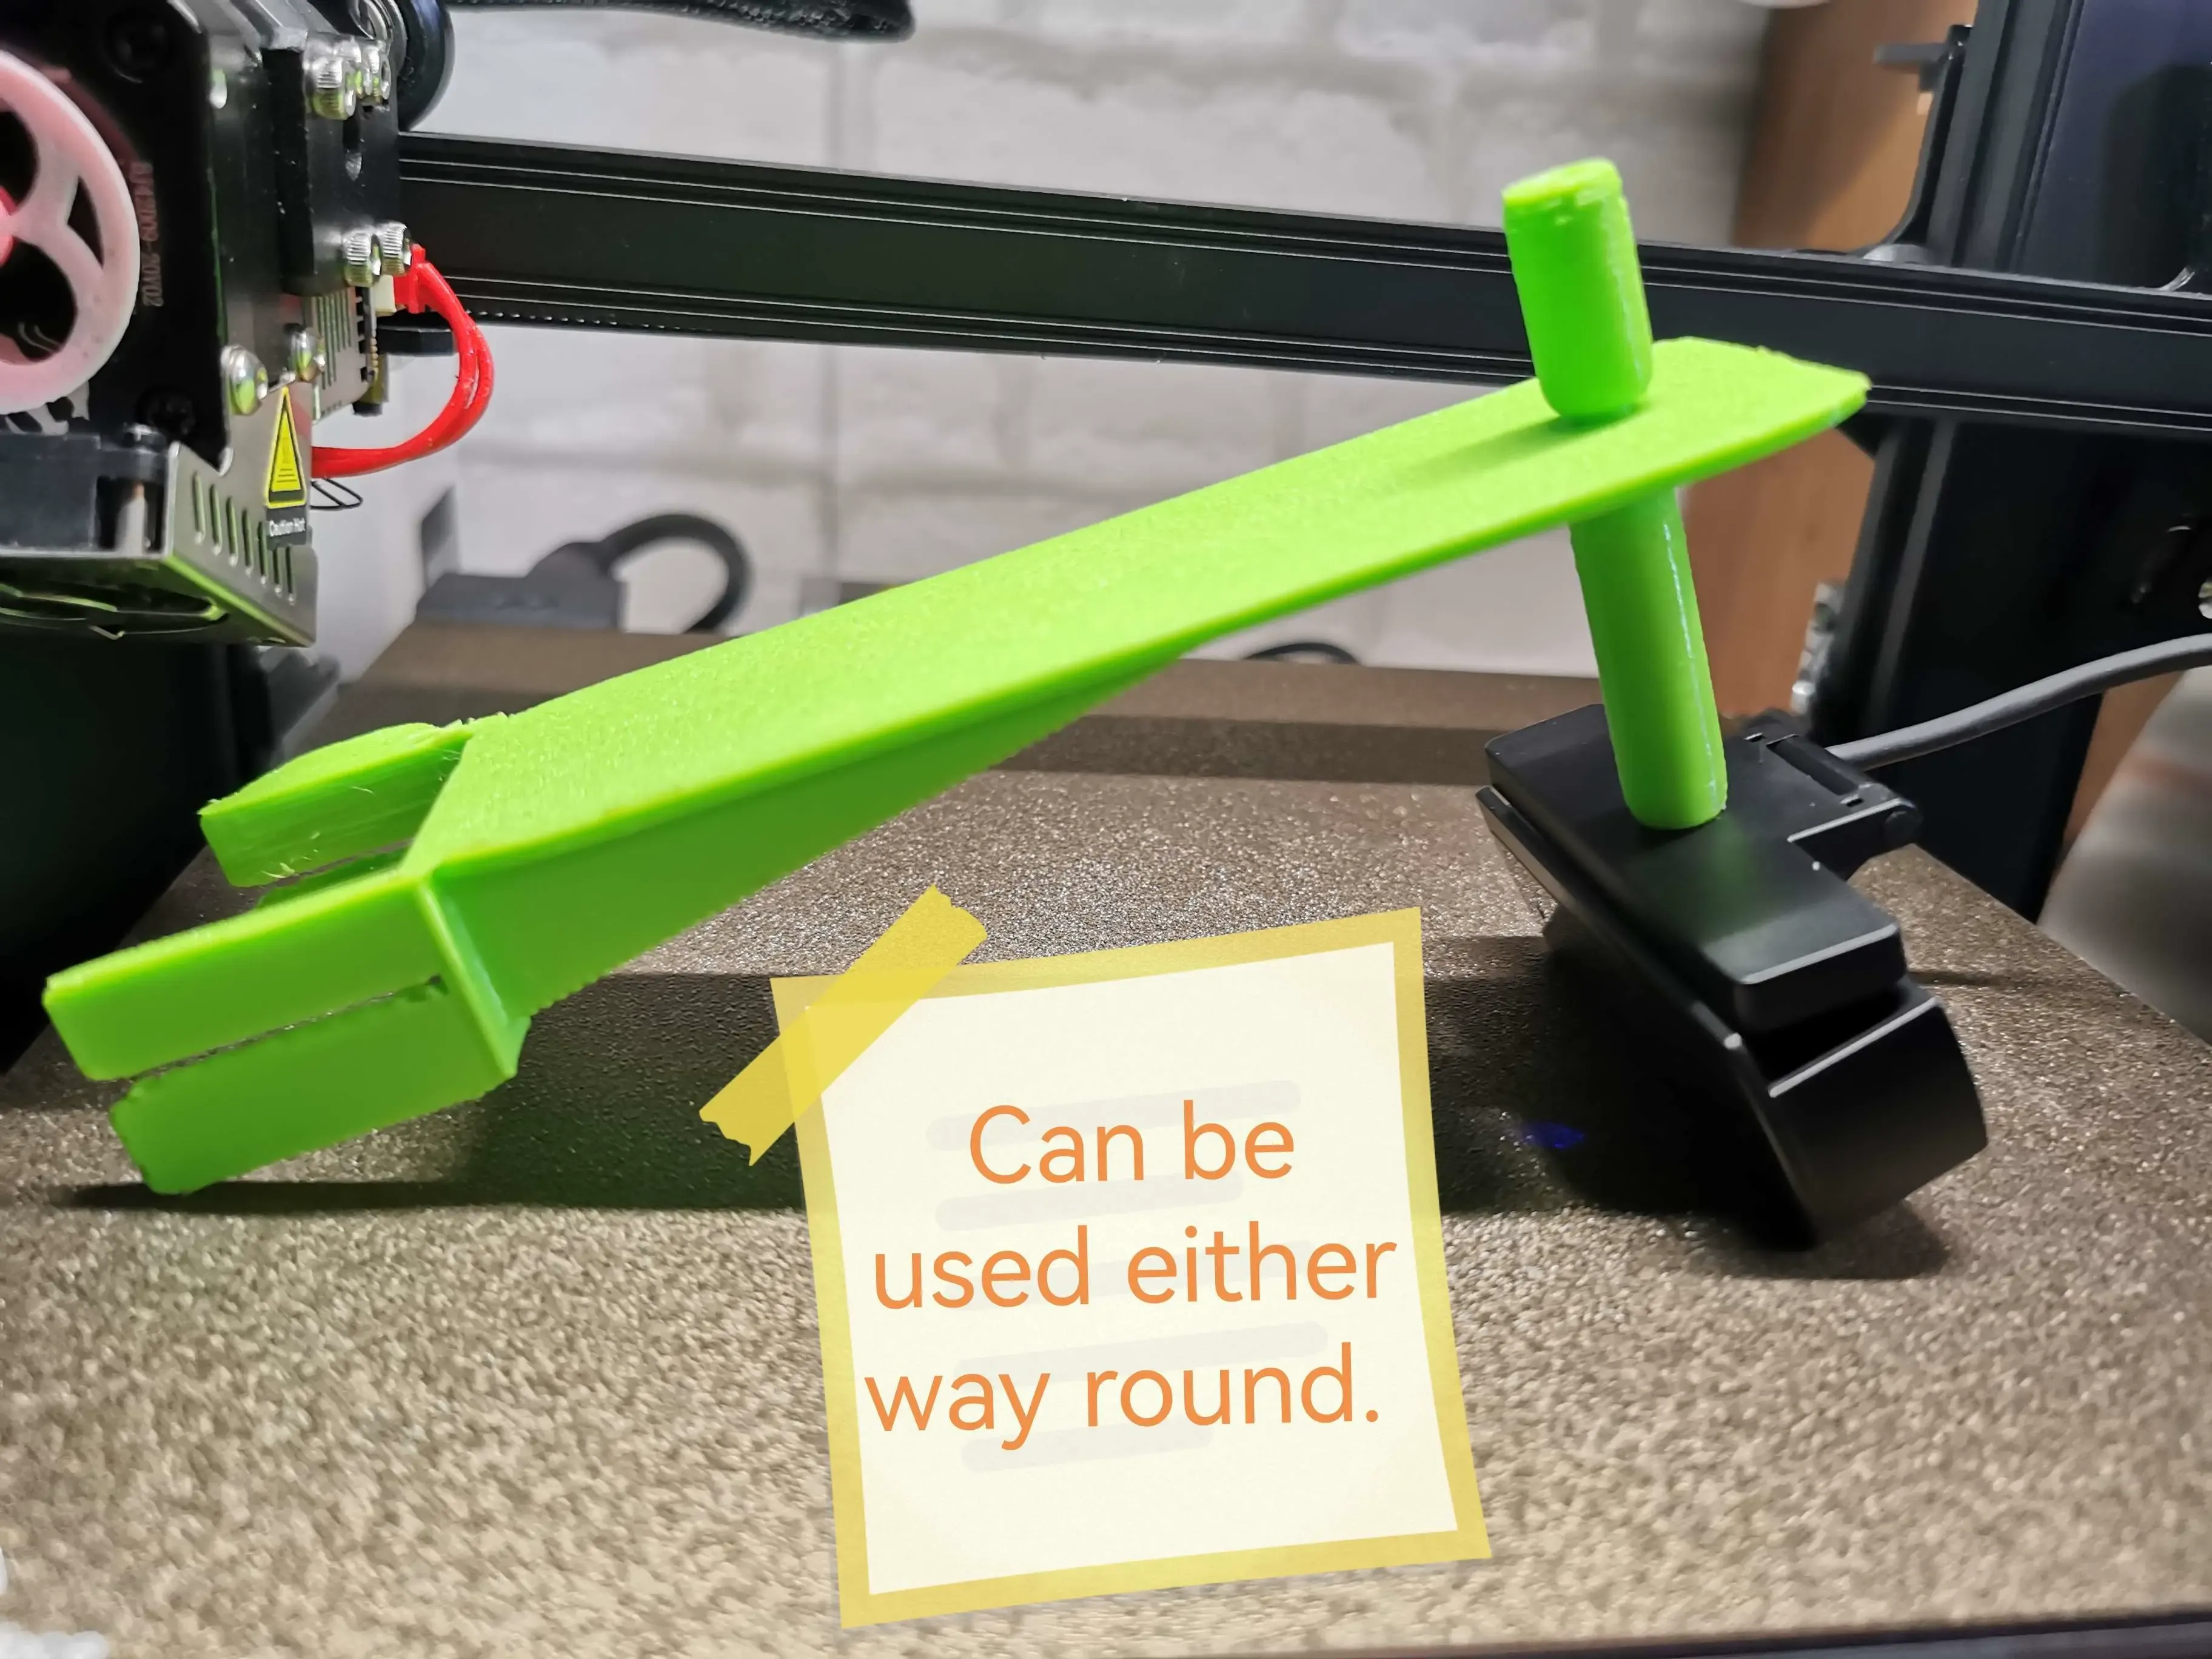 Quick Release Camera Mount - Ender 3 S1 Pro